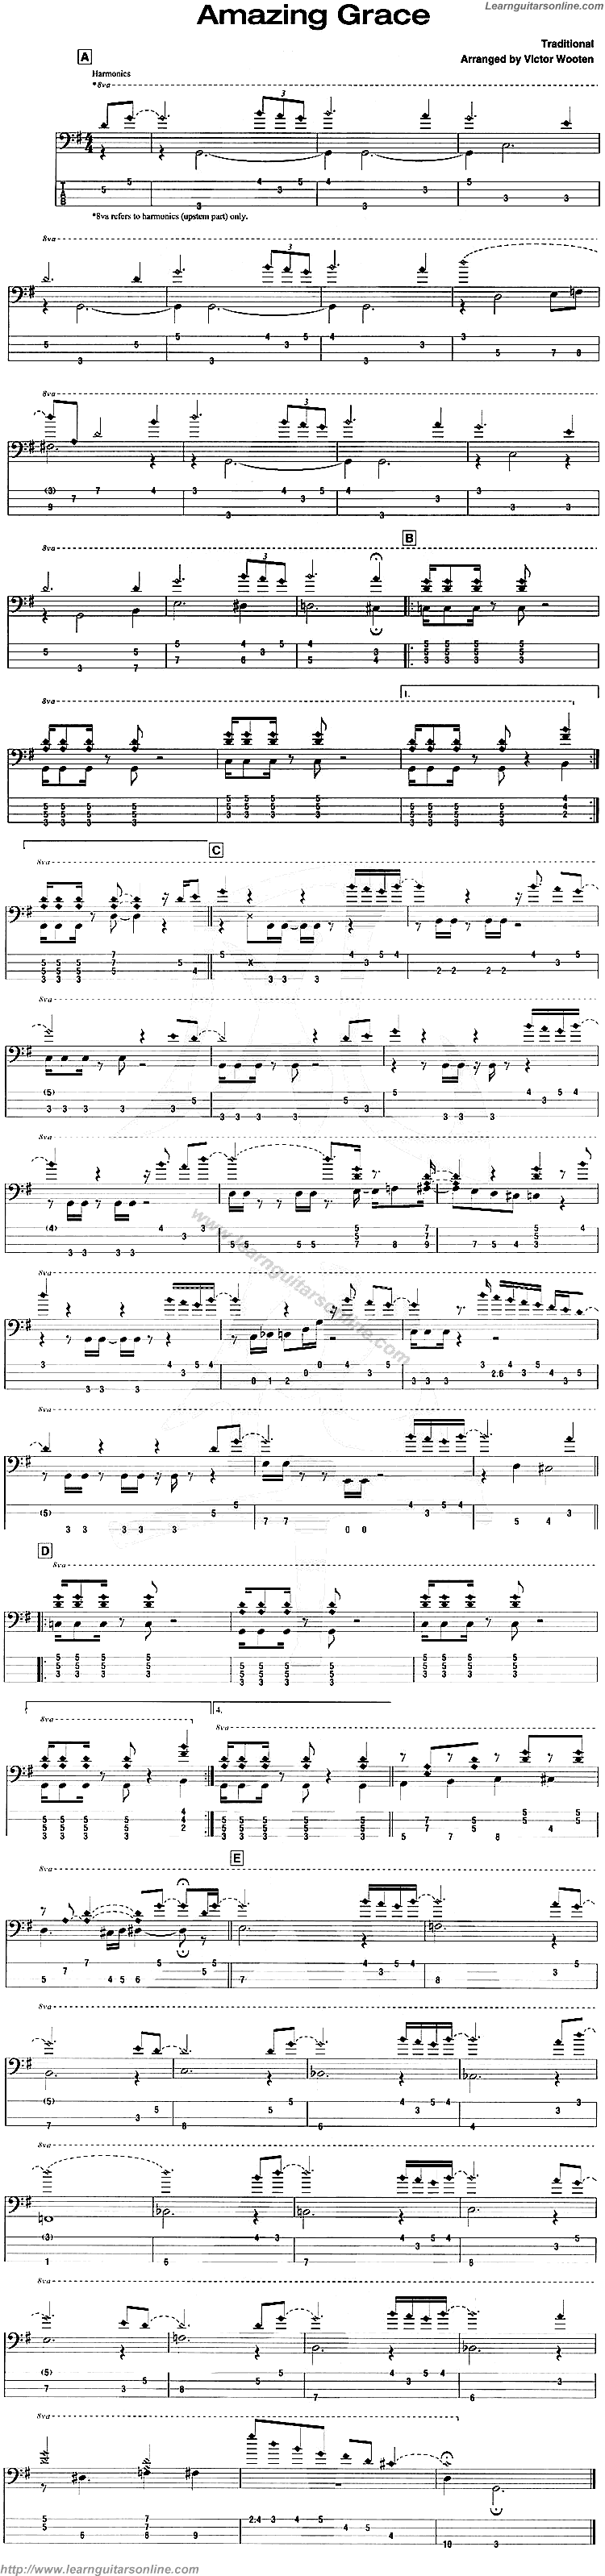 Amazing Grace Bass Tab by Victor Wooten Guitar Tabs Chords Solo Notes Sheet Music Free